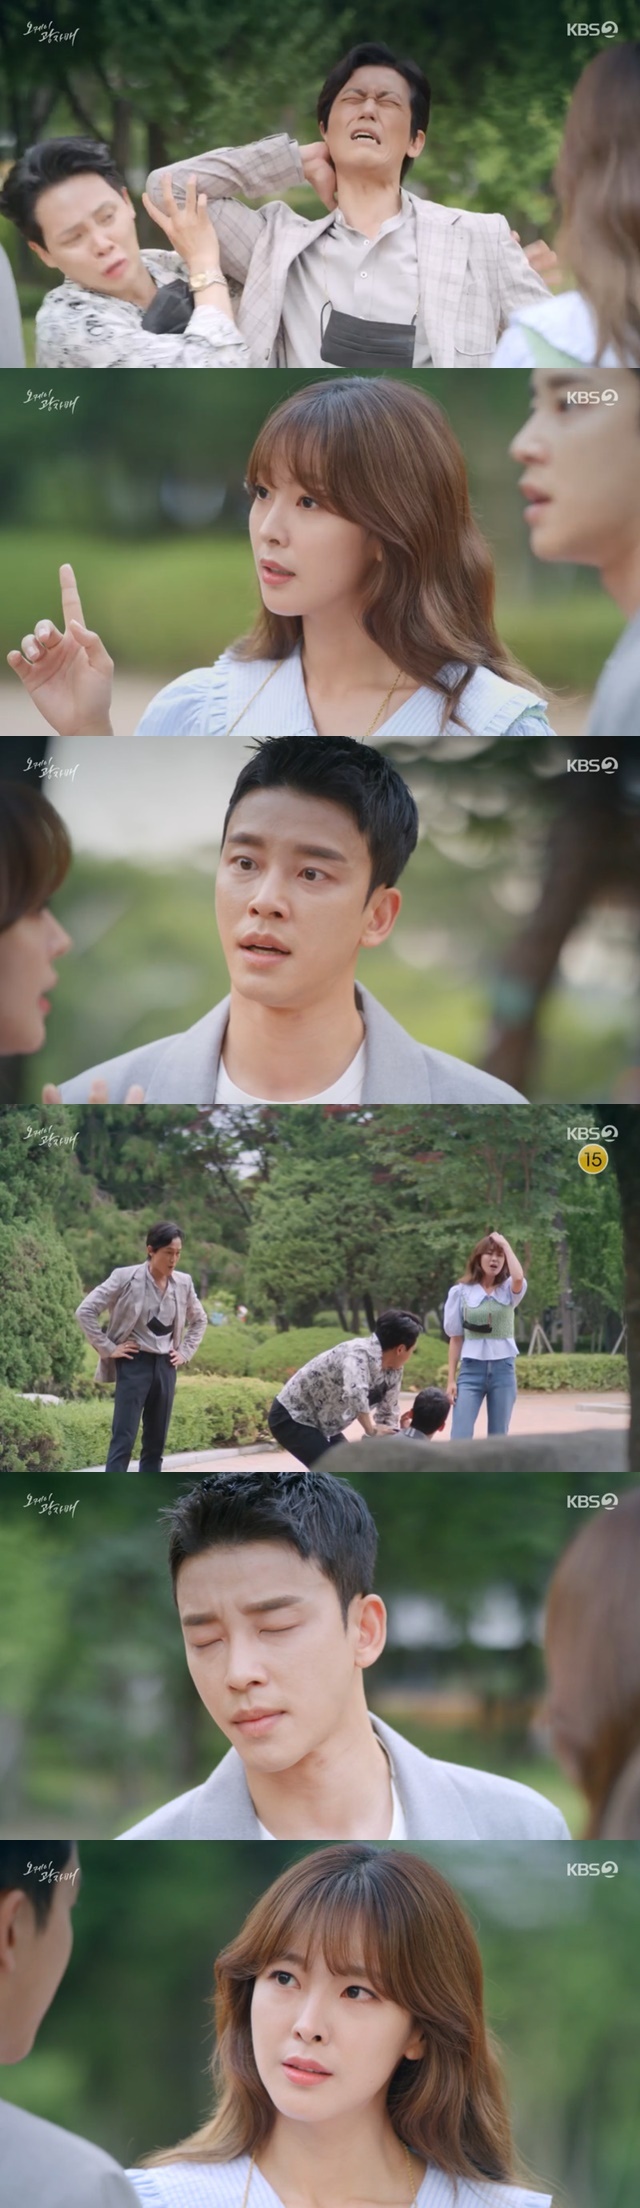 Ko Won-hee knew and Furious the sibling relationship between Joo Seok-tae and Seol Jung-hwan.On the 27th KBS 2TV weekend drama OK Photo Sister (playplay by Moon Young-nam/directed by Lee Jin-seo), which aired on June 19, Lee Kwang-sik (Ko Won-hee) found out that he was the brother of Cho Seok-tae after proposing to Seol Jung-hwan.Shin Maria (Ha Jae-sook) did not come out of the bathroom on the first night of her honeymoon with Bae Byung-ho (Choi Dae-cheol), and she fell down when Bae Byun-ho called people and opened the door.The bowel movement rushed Sinmaria to the hospital, but Sinmaria died; the bowel movement was feverish, and the funeral of Sinmaria was held with her mother, Jipungnyeon (Lee Sang-sook).Lee Kwang-sik (Jeon Hye-bin) caught Han Ye-seul by trying to meet Han Ye-seul (Kim Kyung-nam), the son of his aunt Oh Bong-ja (Lee Bo-hee).Lee Kwang-sik was in a nightmare because he would know that Han Ye-seuls father, First Love, was a miser.Lee Kwang-tae (Ko Won-hee) was in conflict to catch the pre-marriage heroine, Seol Jung-hwan, who did not go to the meeting because of Lee Kwang-tae.Otangza (Kim Hye-sun) was drinking with Byeon Gong-chae (Kim Min-ho) and then playing a mole-catching game, leaving his post after his past history.You may miss First Love, but if you get caught, you will get 20 million won and interest. Soon Byun Gong-chae was astonished to discover that First Love, who had fled with my money bag, was Otangja.Lee Cheol-soo (Yoon Joo-sang) left a toolbox at the house where he was in charge of repair work with Handolse, so he visited again late at night and witnessed the landlord asking for a bunch of money in the garden.That night, Lee had a dream of stealing the money and giving it to his three daughters, Lee Kwang-nam (Hong Eun-hee), Lee Kwang-sik, Lee Kwang-tae, two sisters, Oh Bong-ja and Otangja.Bae Byeong-ho had a conflict by preventing the rice that his mother had put in his mouth to the puddle, and the puddle went down to his hometown.Bae Byun-ho carried out a puddle to work at the company, and rumors circulated that the in-house bowel was cheated, gave birth to a child, and was abandoned by his two wives.Bae Byun-ho was struggling with childcare and met Sam Hammington for advice.Sam Hammington advised him to play until he was tired, and Bae Byun-ho went to buy a childs toy and met his ex-wife Lee Kwang-nam. Lee Kwang-nam said to Bae, who met while delivering fish, I work at my aunts shop.I heard that I had been on a honeymoon. He did not tell me that his wife, Shin Maria, was dead.Handolse tried to buy his son Han Ye-seul a dress for the audition, and Oh Bongja provided the money to Handolse to look good to Han Ye-seul.Lee Kwang-sik stopped his love when his brother Lee Kwang-tae fell into the character of Hugijin, but Lee Kwang-tae eventually went to Hugijin and said, Do you have to starve?